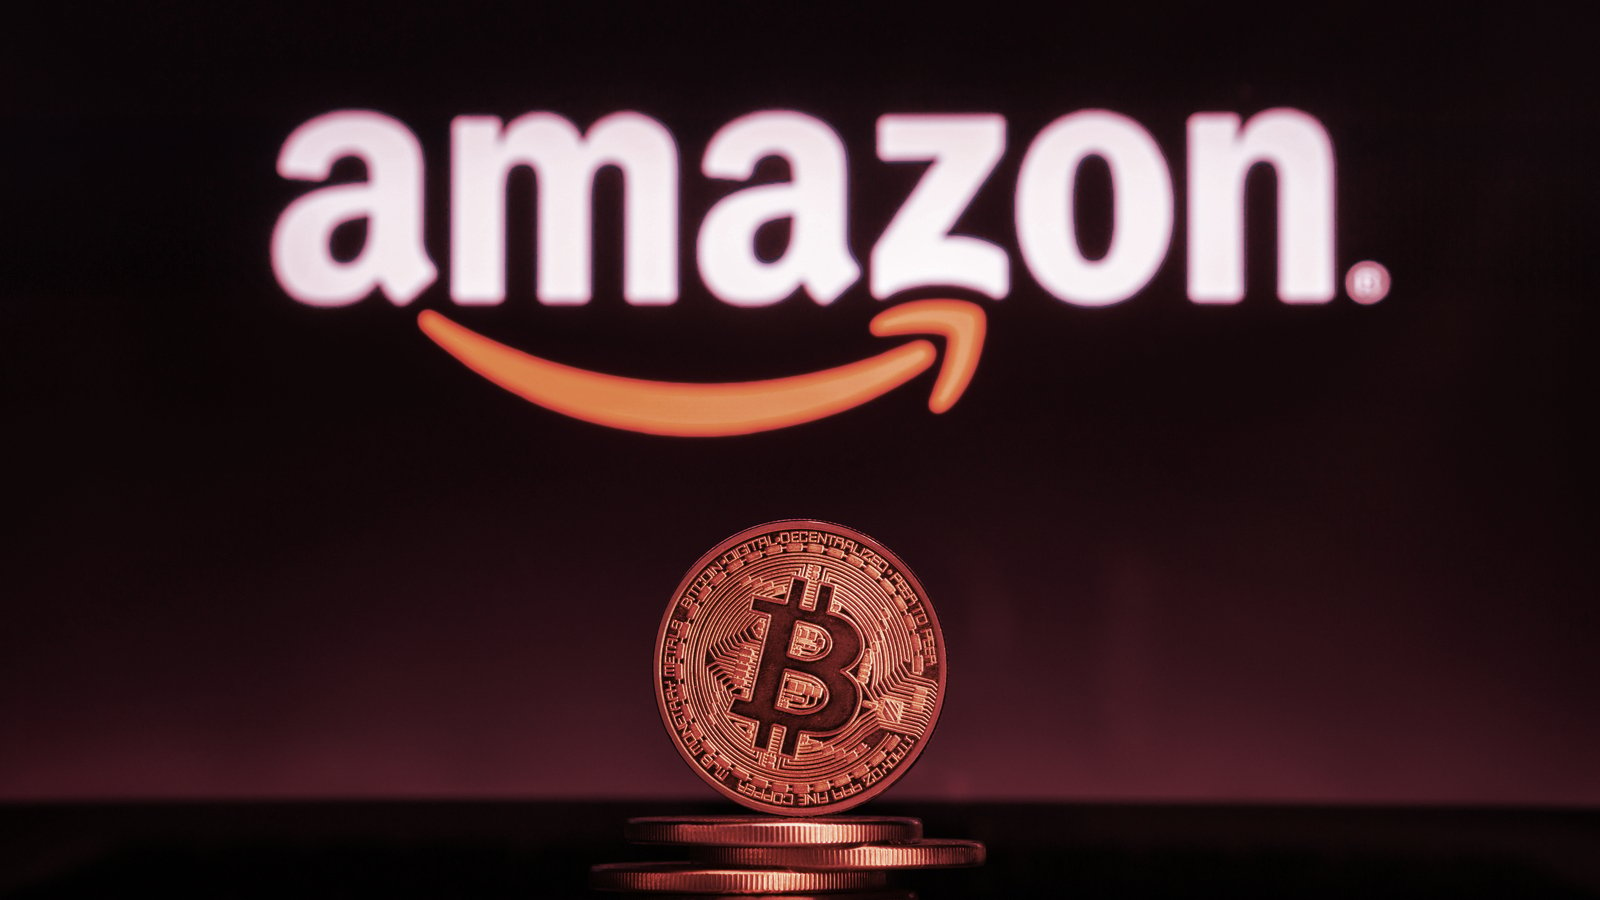 Amazon Won't Support Crypto Payments Any Time Soon: CEO